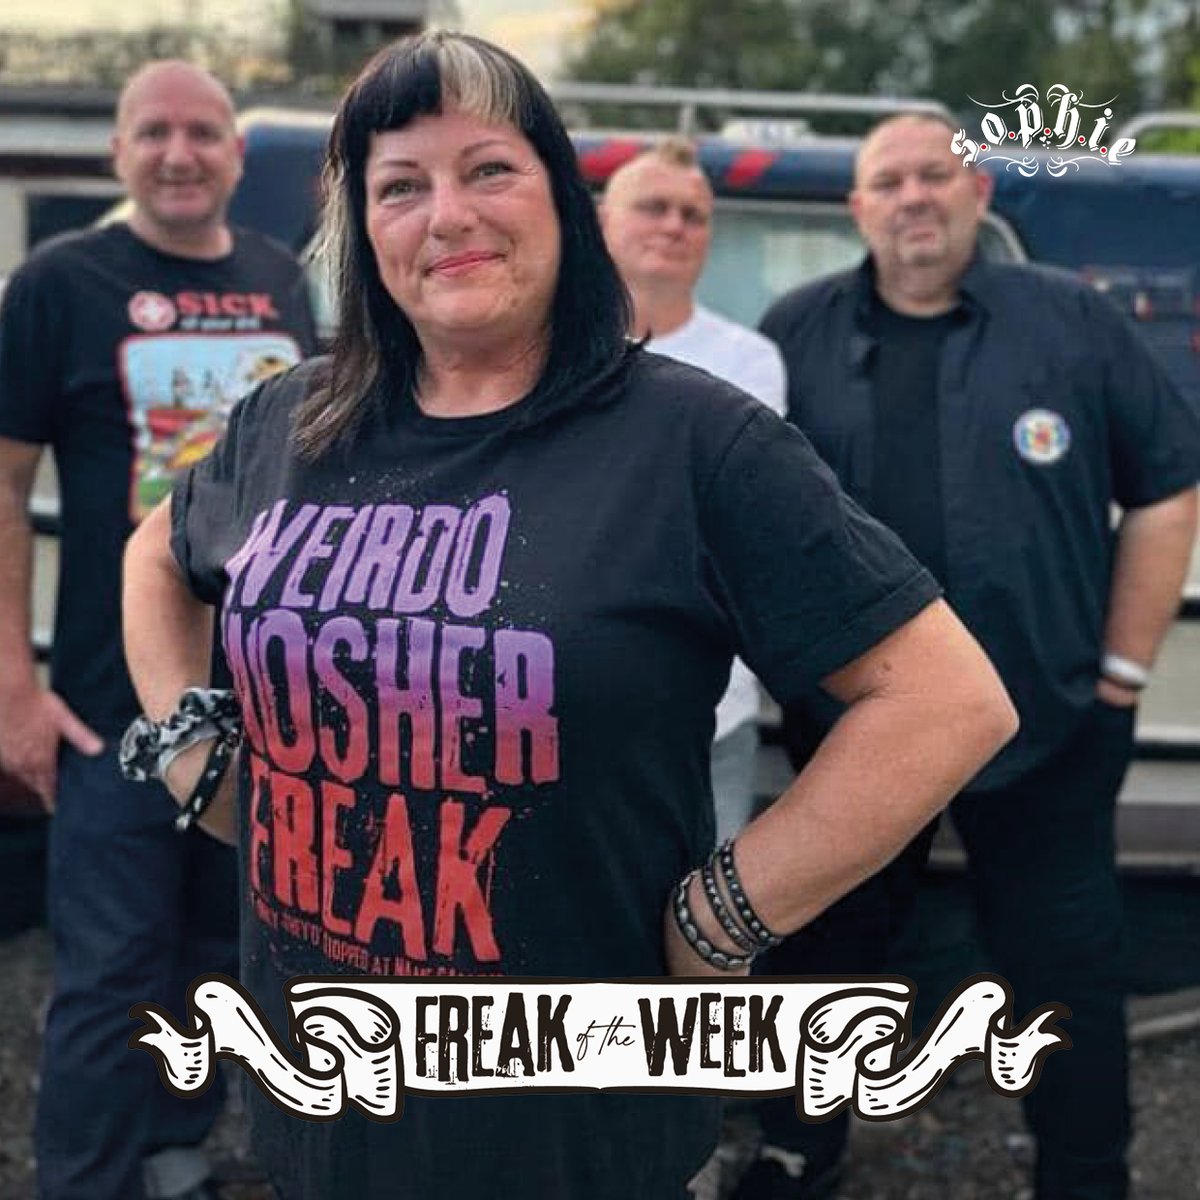 This week's Freak of the Week is Gail! 😍 Wearing last year's awesome gradient tee - thanks for the support Gail 🖤 #wearesophie